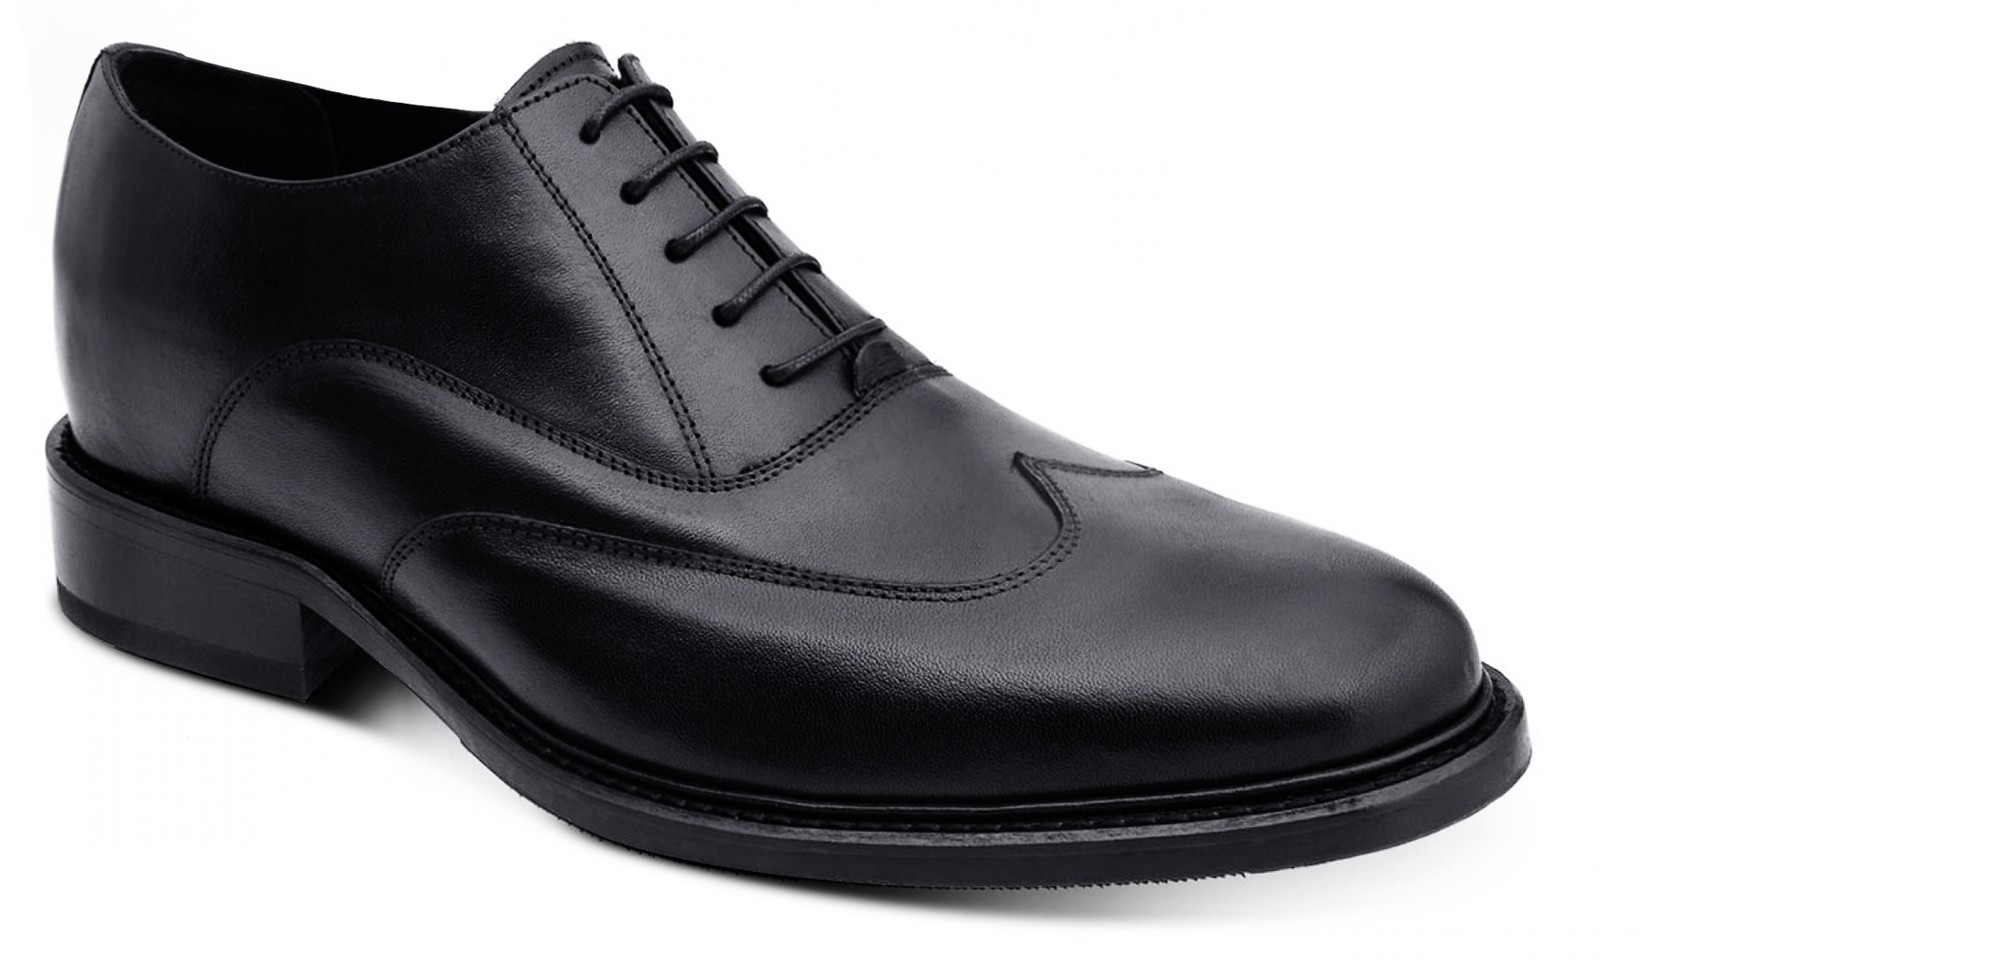 Firenze - Elevator Shoes in Full Grain Leather from 2.4 to 3.1 inches